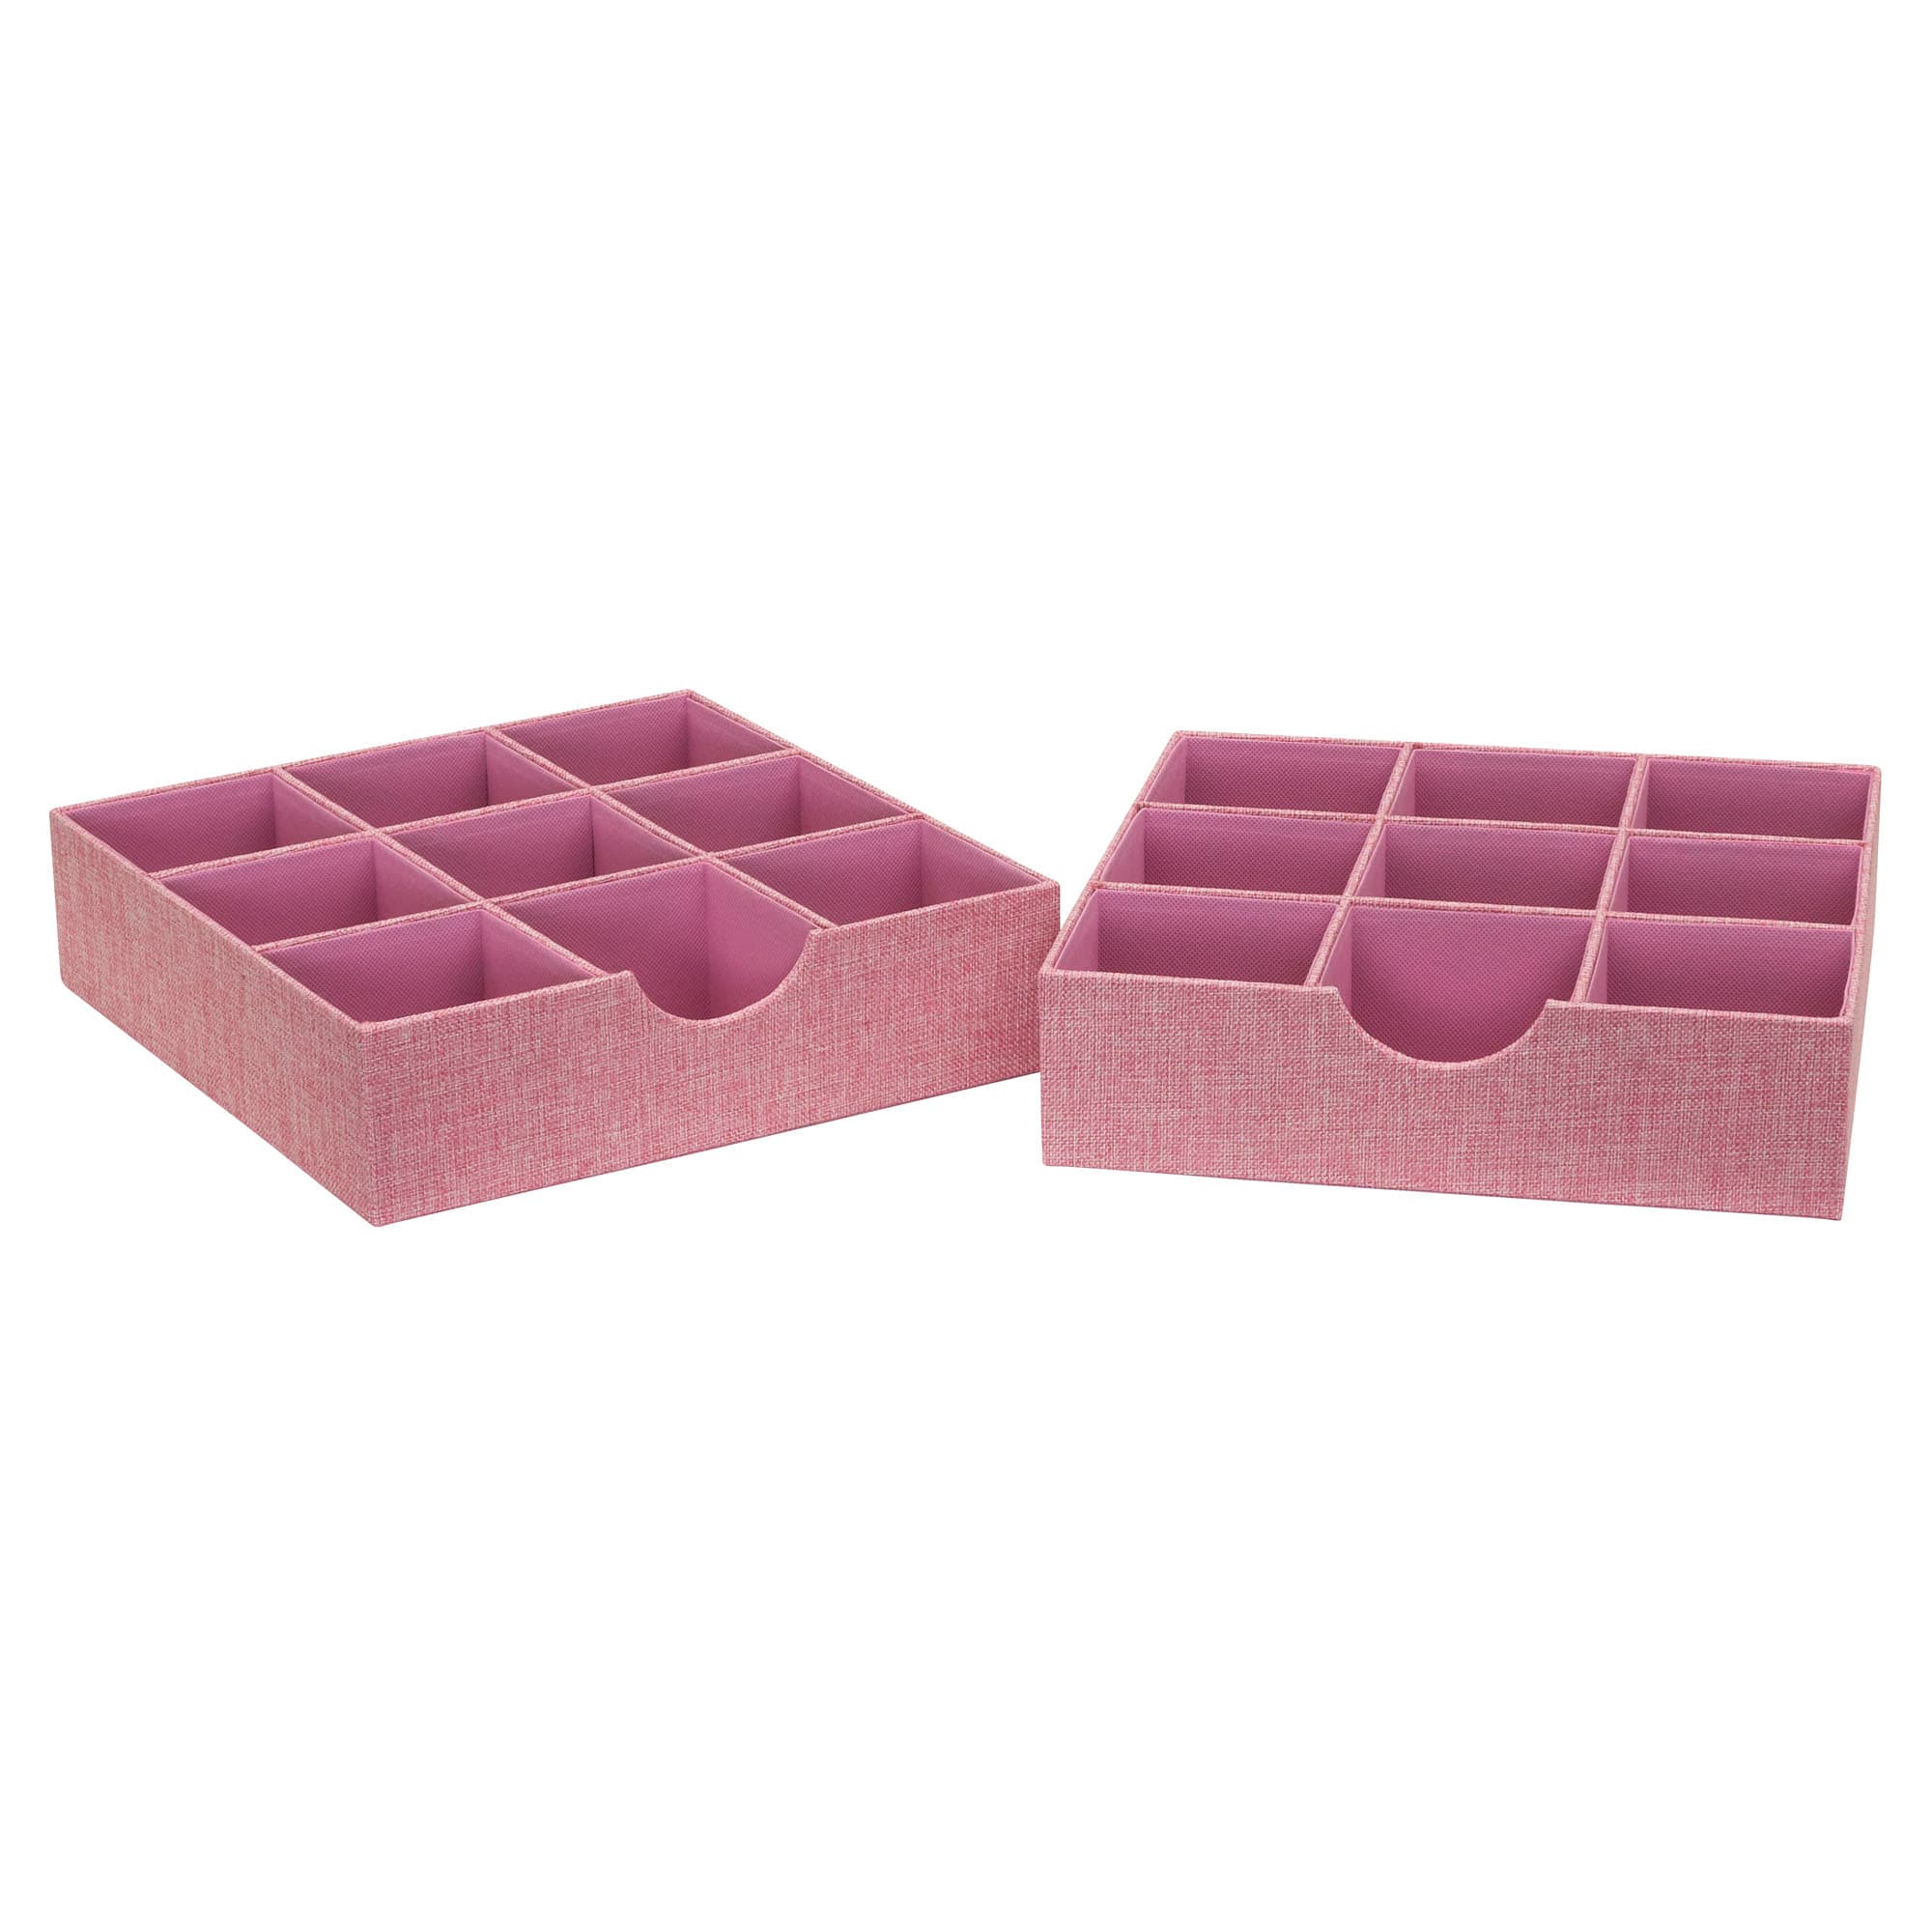 Basicwise Stackable Plastic Storage Container Set of 3 Pink